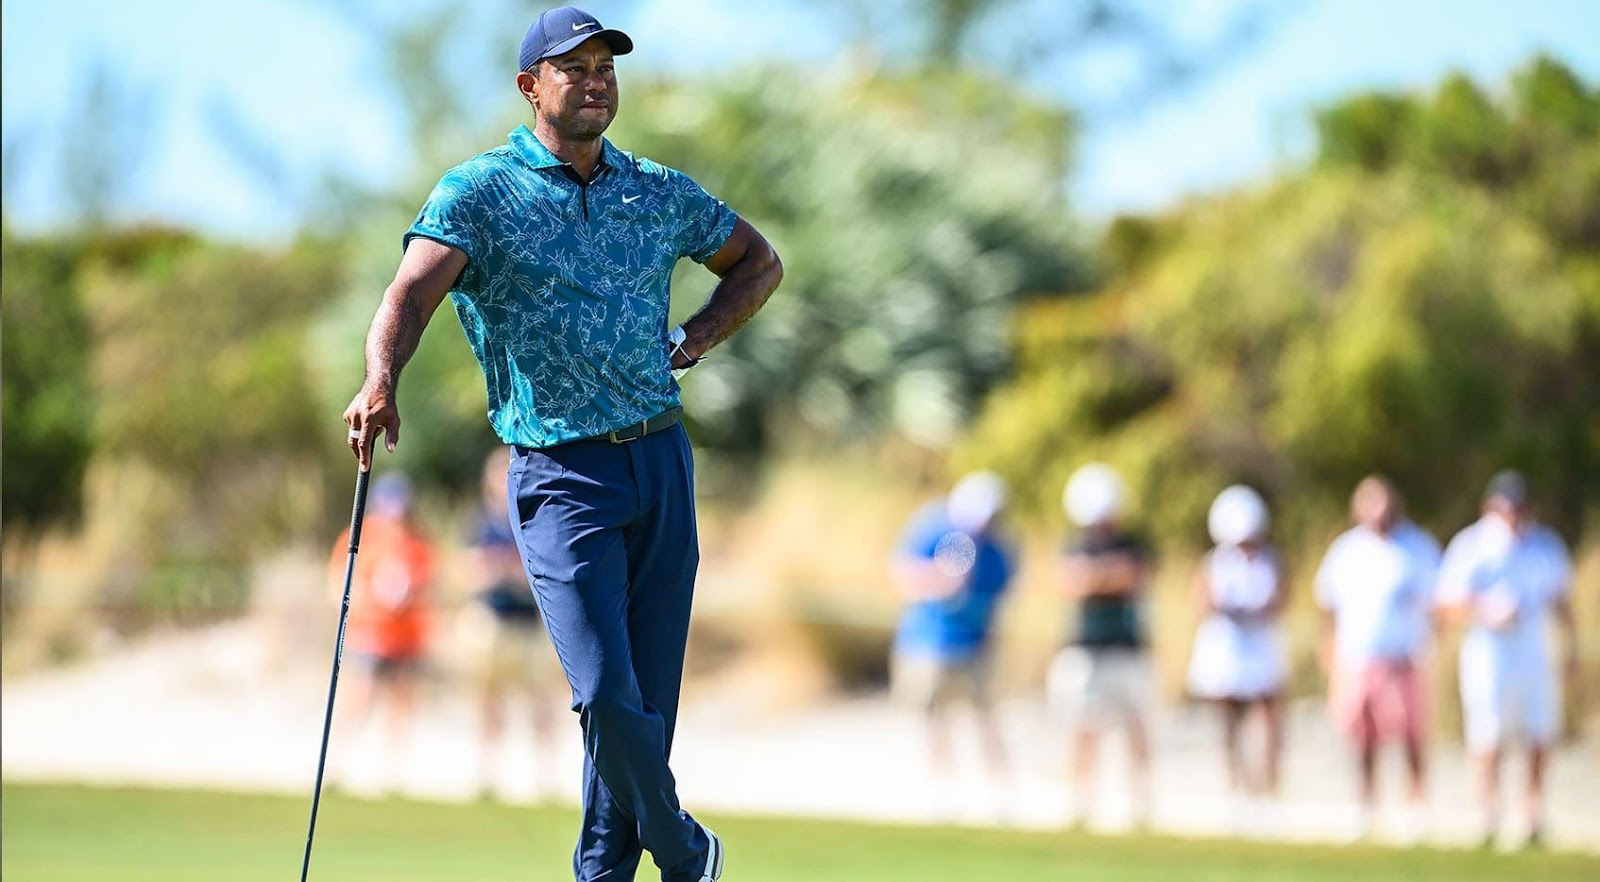 Tiger Woods flashes top form but has a ways to go - PGA TOUR